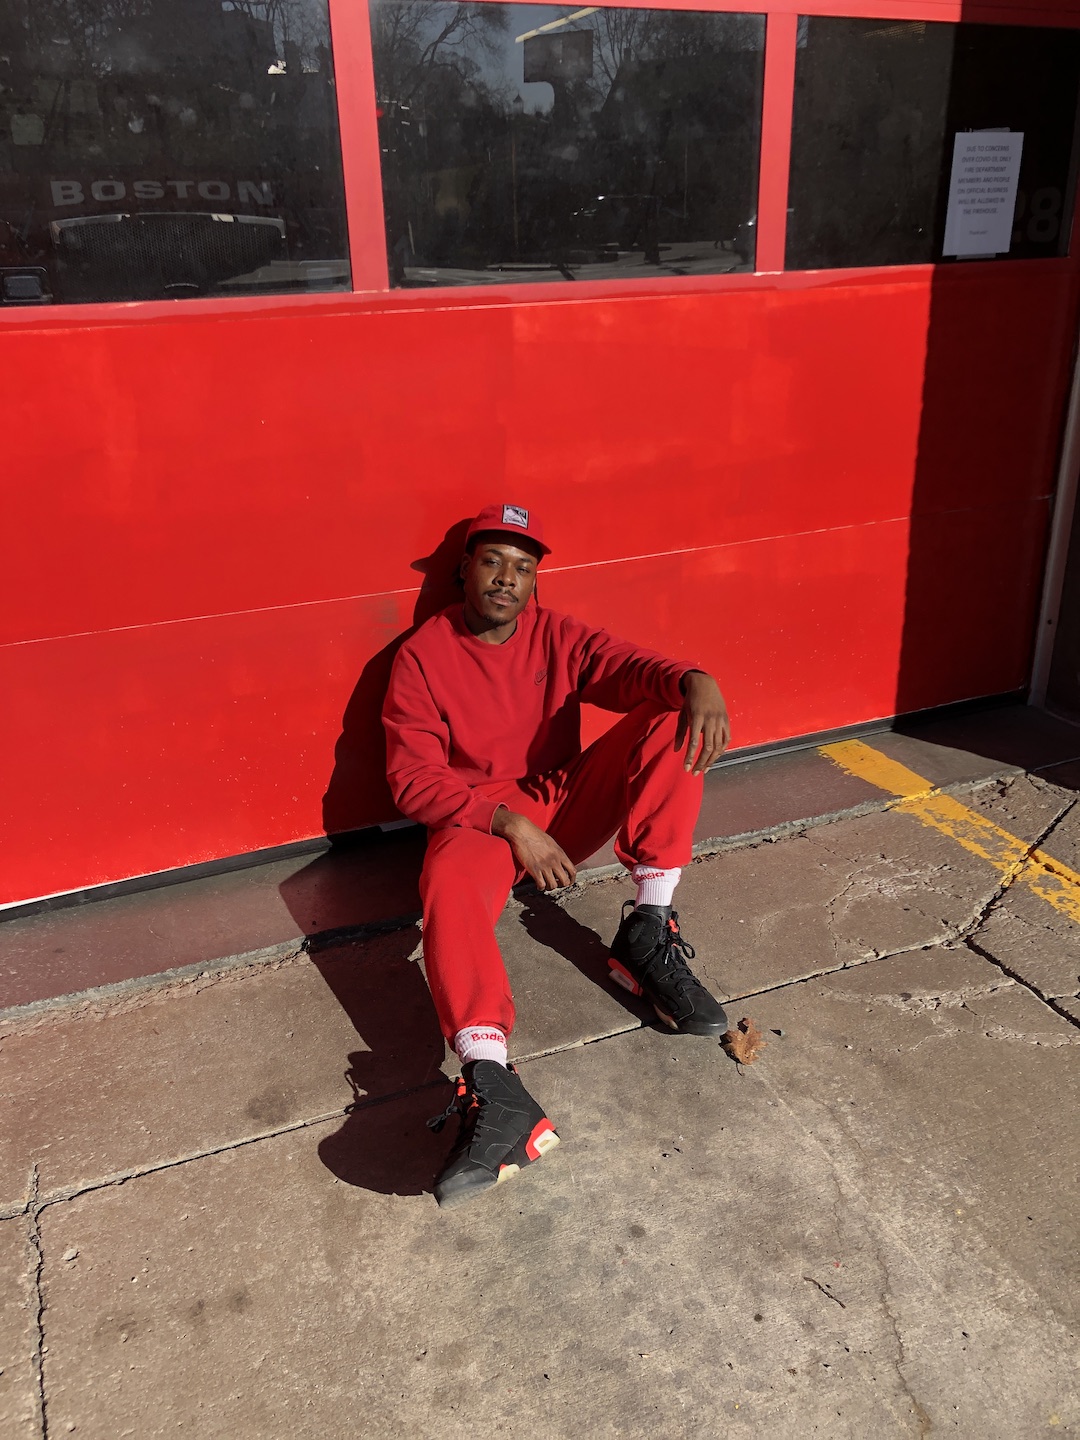 A man wearing all red sitting on a pavement against a red-colored building.